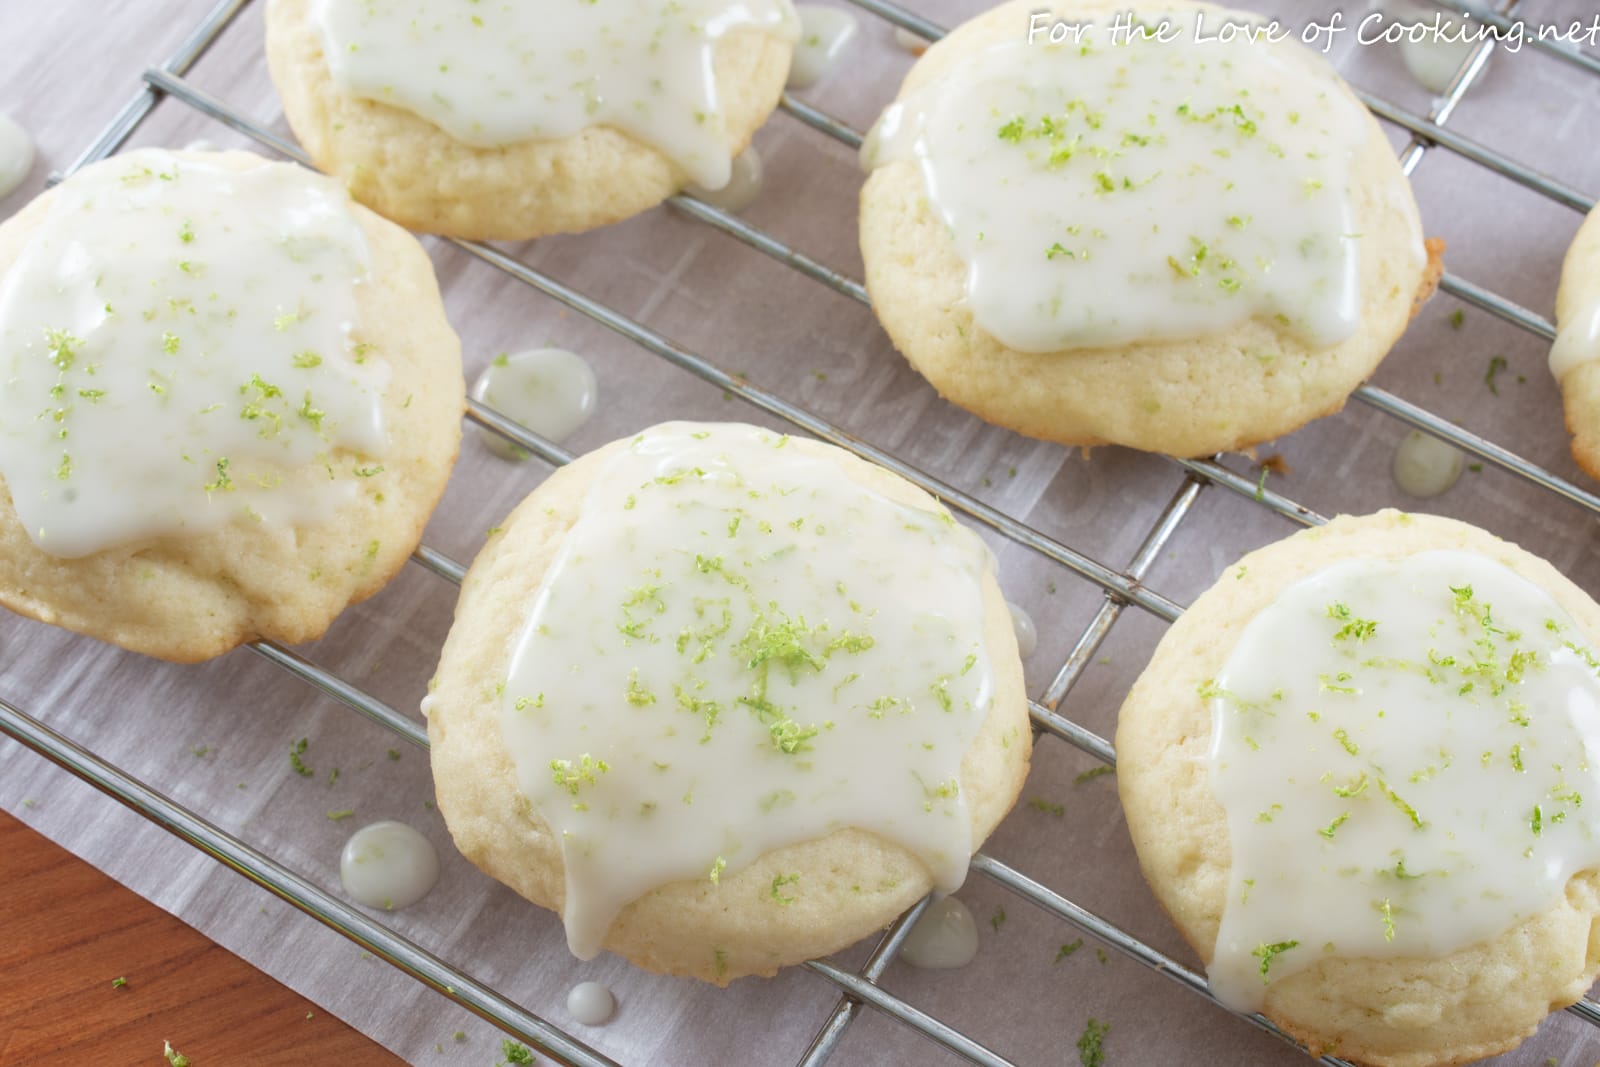 https://fortheloveofcooking-net.exactdn.com/wp-content/uploads/2019/05/Glazed-Lime-and-Coconut-Cookies-7617.jpg?strip=all&lossy=1&quality=90&ssl=1